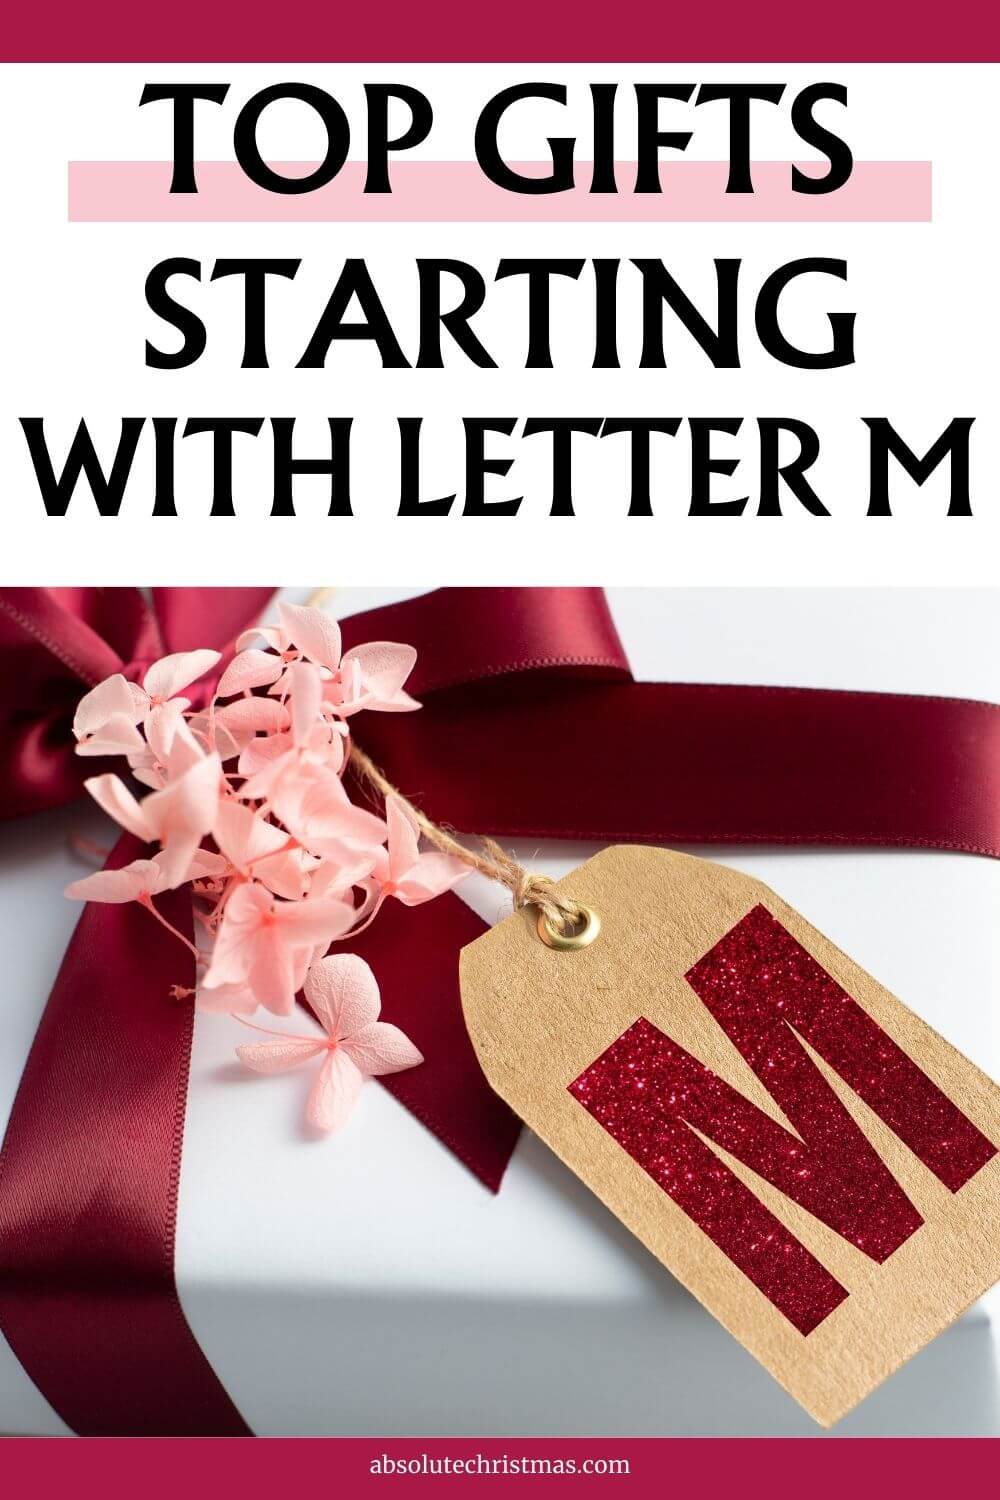 Top Gifts Starting With Letter M